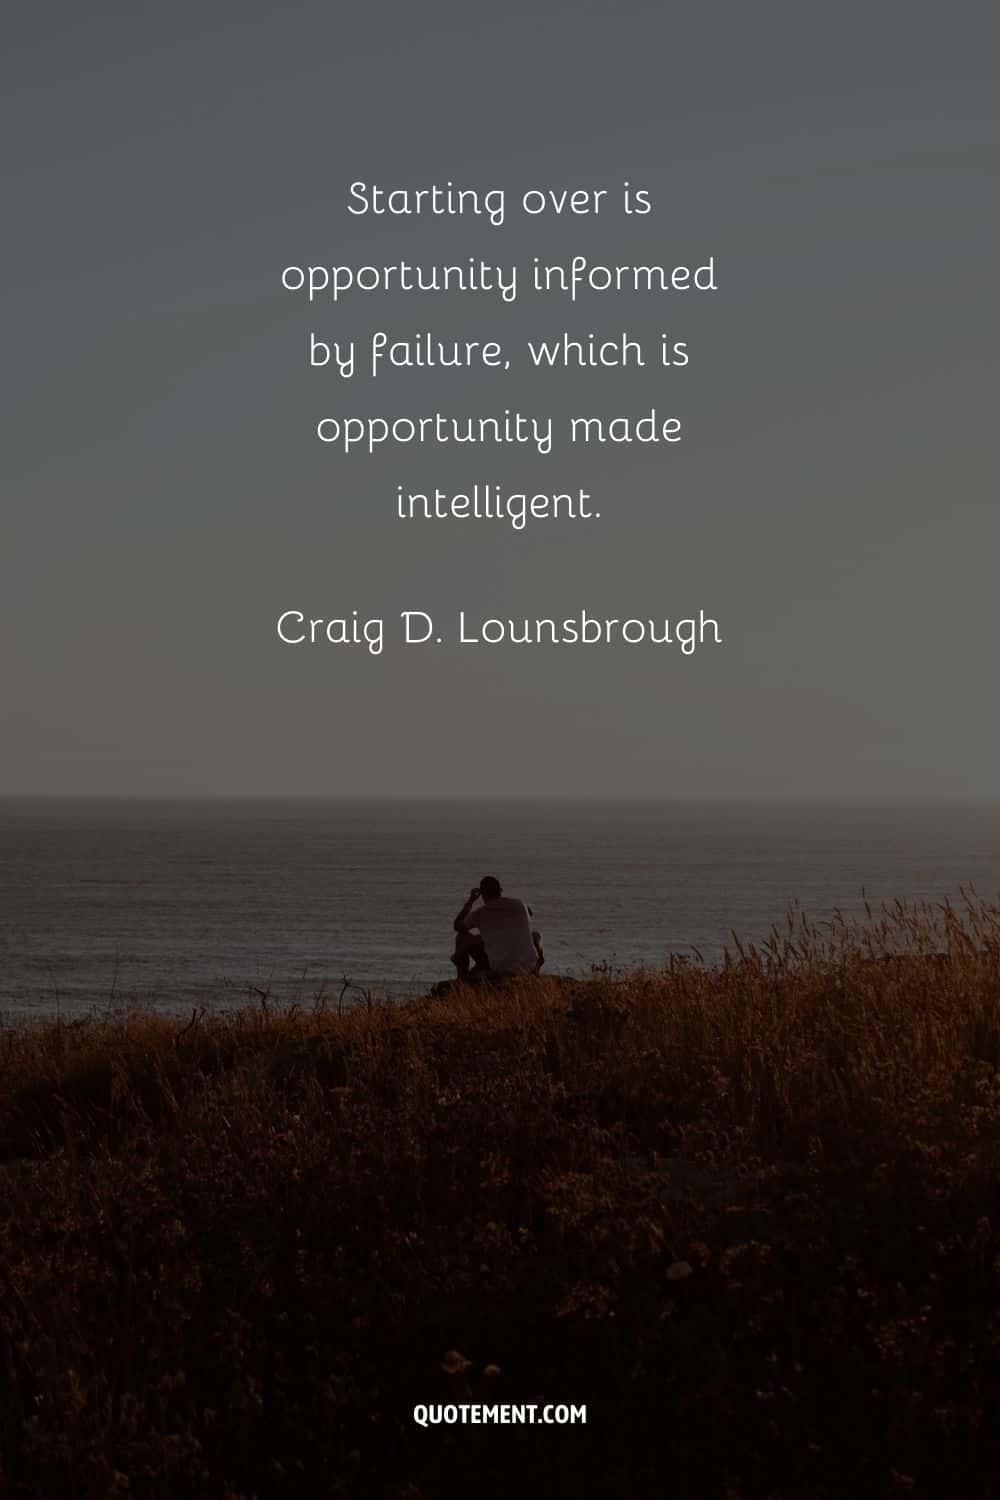 “Starting over is opportunity informed by failure, which is opportunity made intelligent.” — Craig D. Lounsbrough